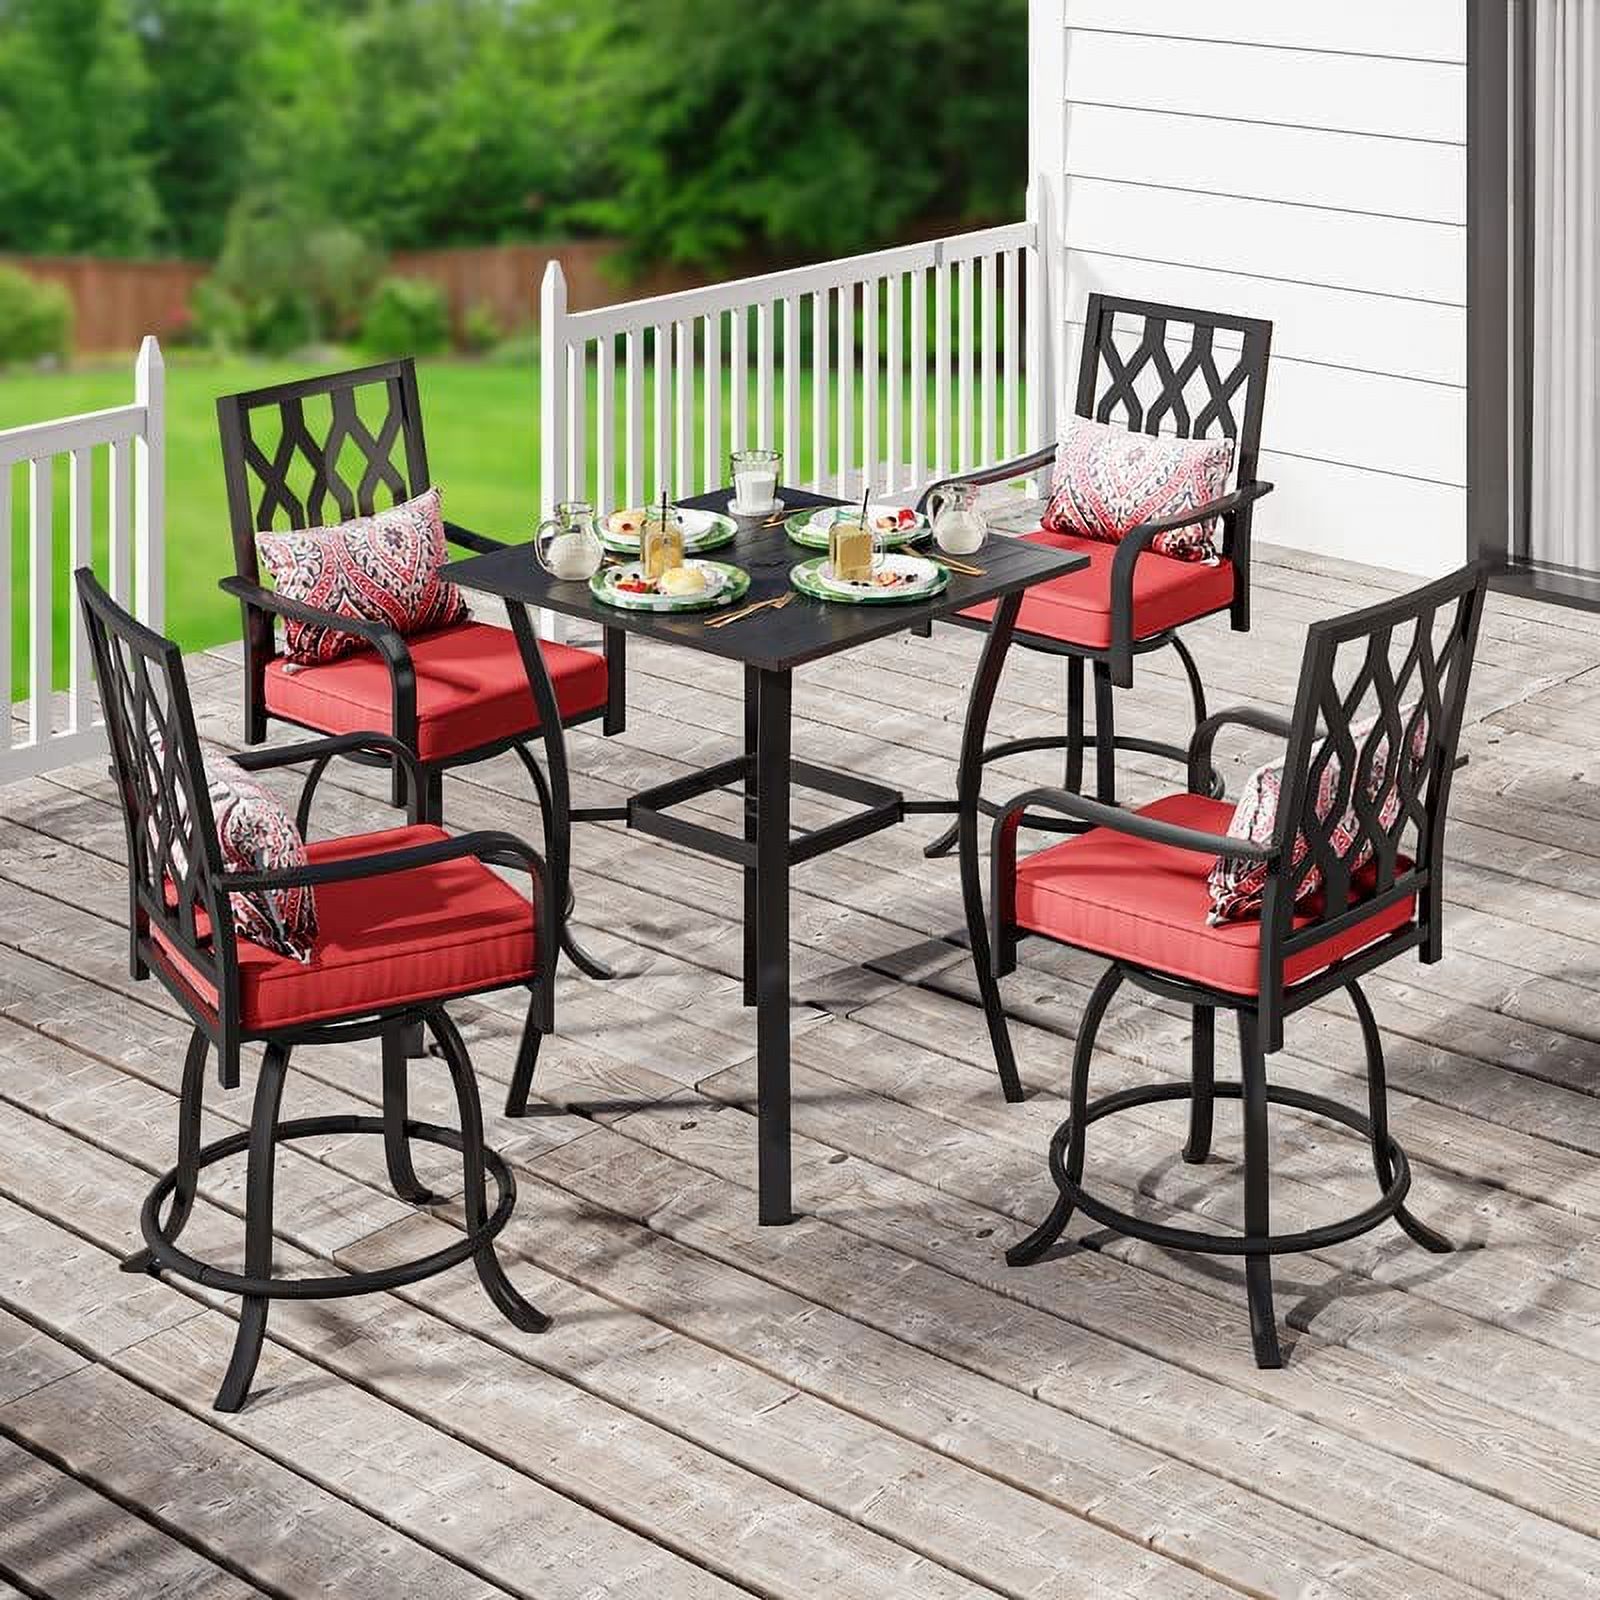 Dextrus 5-Piece Patio Swivel Bar Set, 32" Square Patio Bar Table (Umbrella Hole) and 4 Cushioned Swivel Bar Stools, Metal Patio Bar Set Ideal for Patio Lawn Garden Porch, Black - image 1 of 7